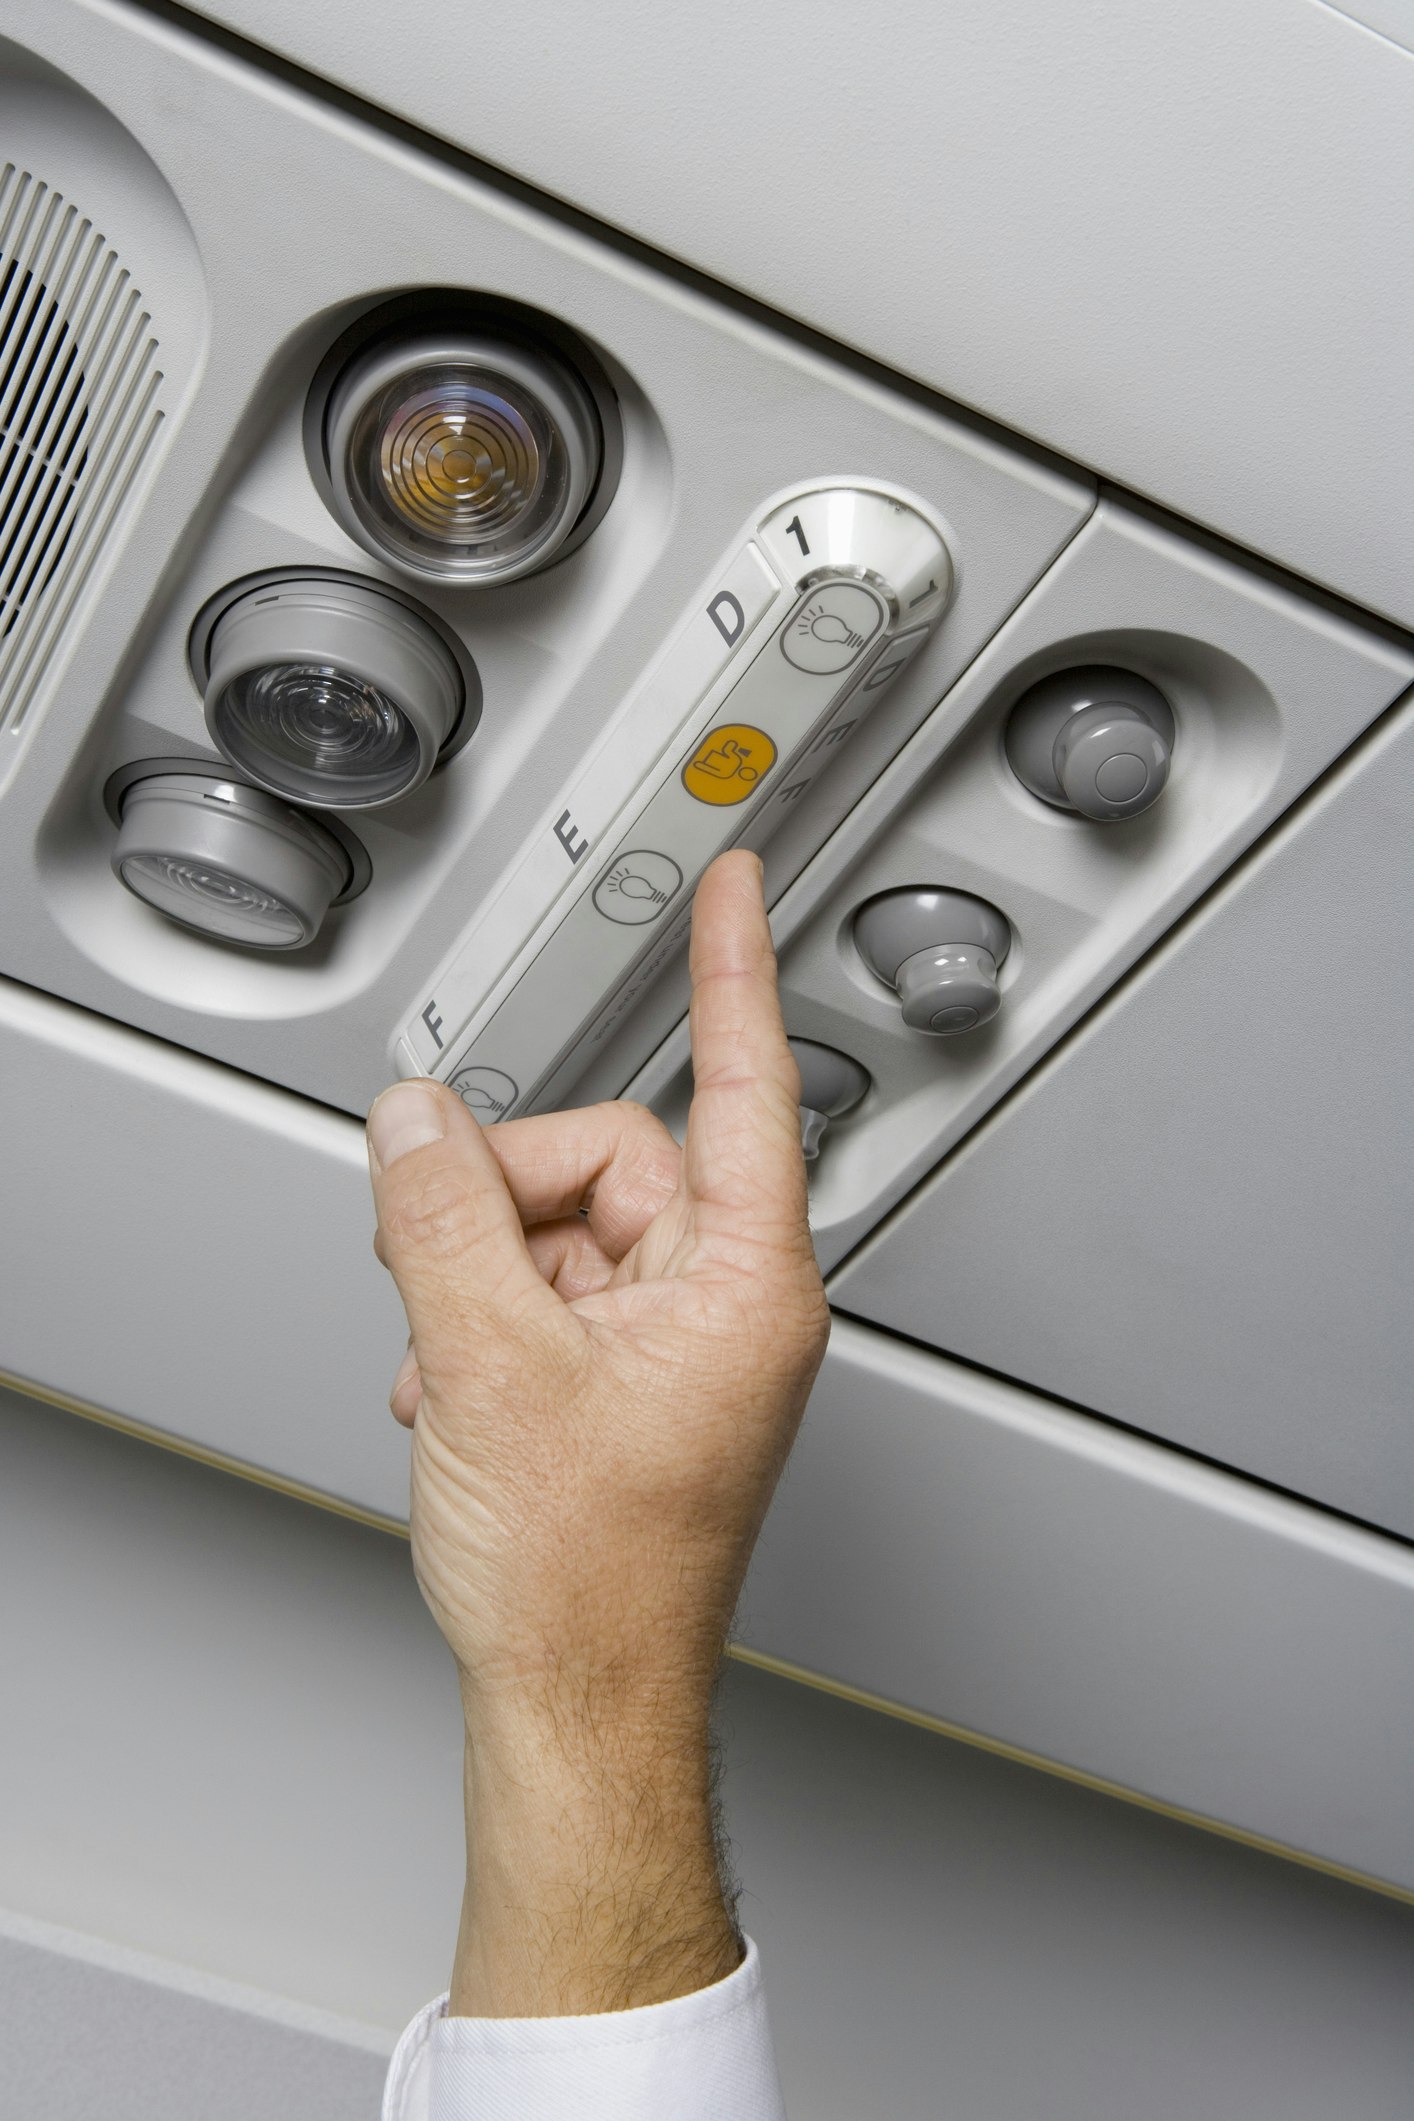 Travel News - A finger pressing the call button on an airplane